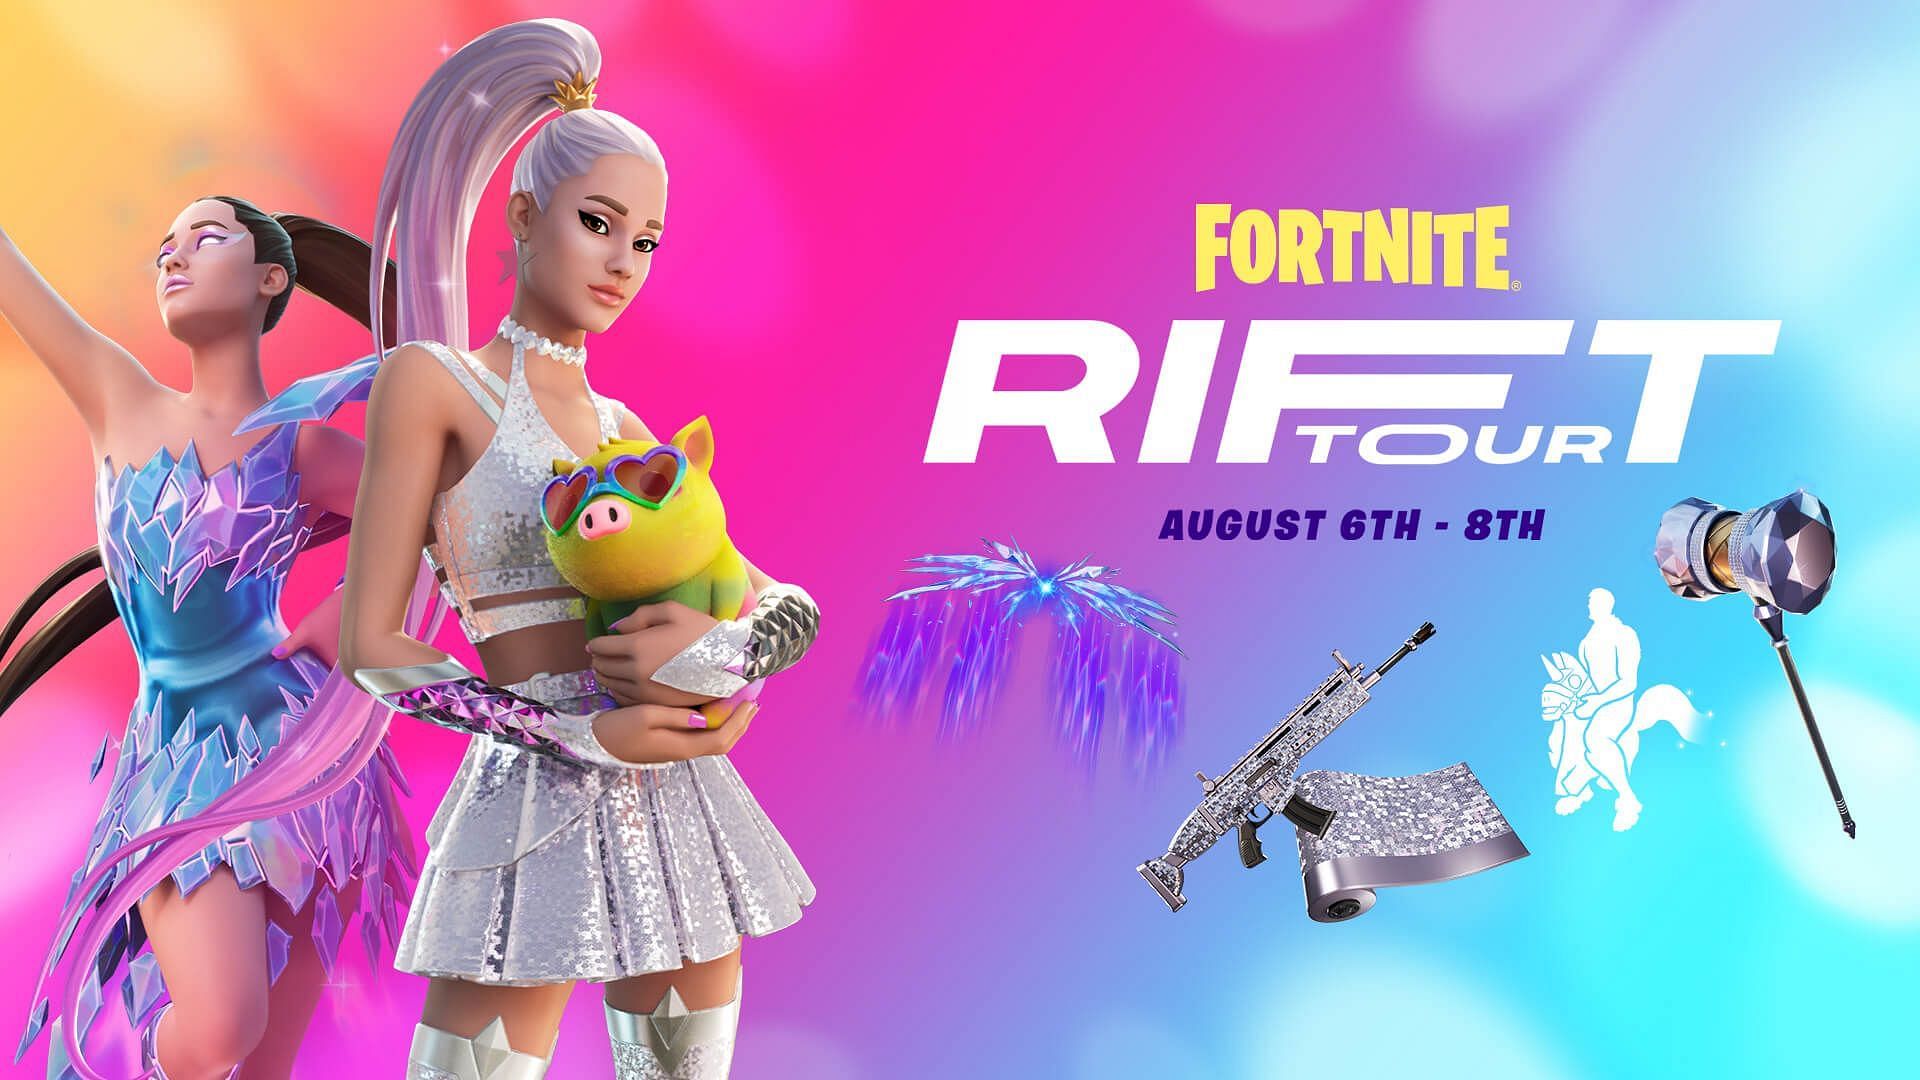 Live concerts have brought tons of players back to Fortnite (Image via Epic Games)